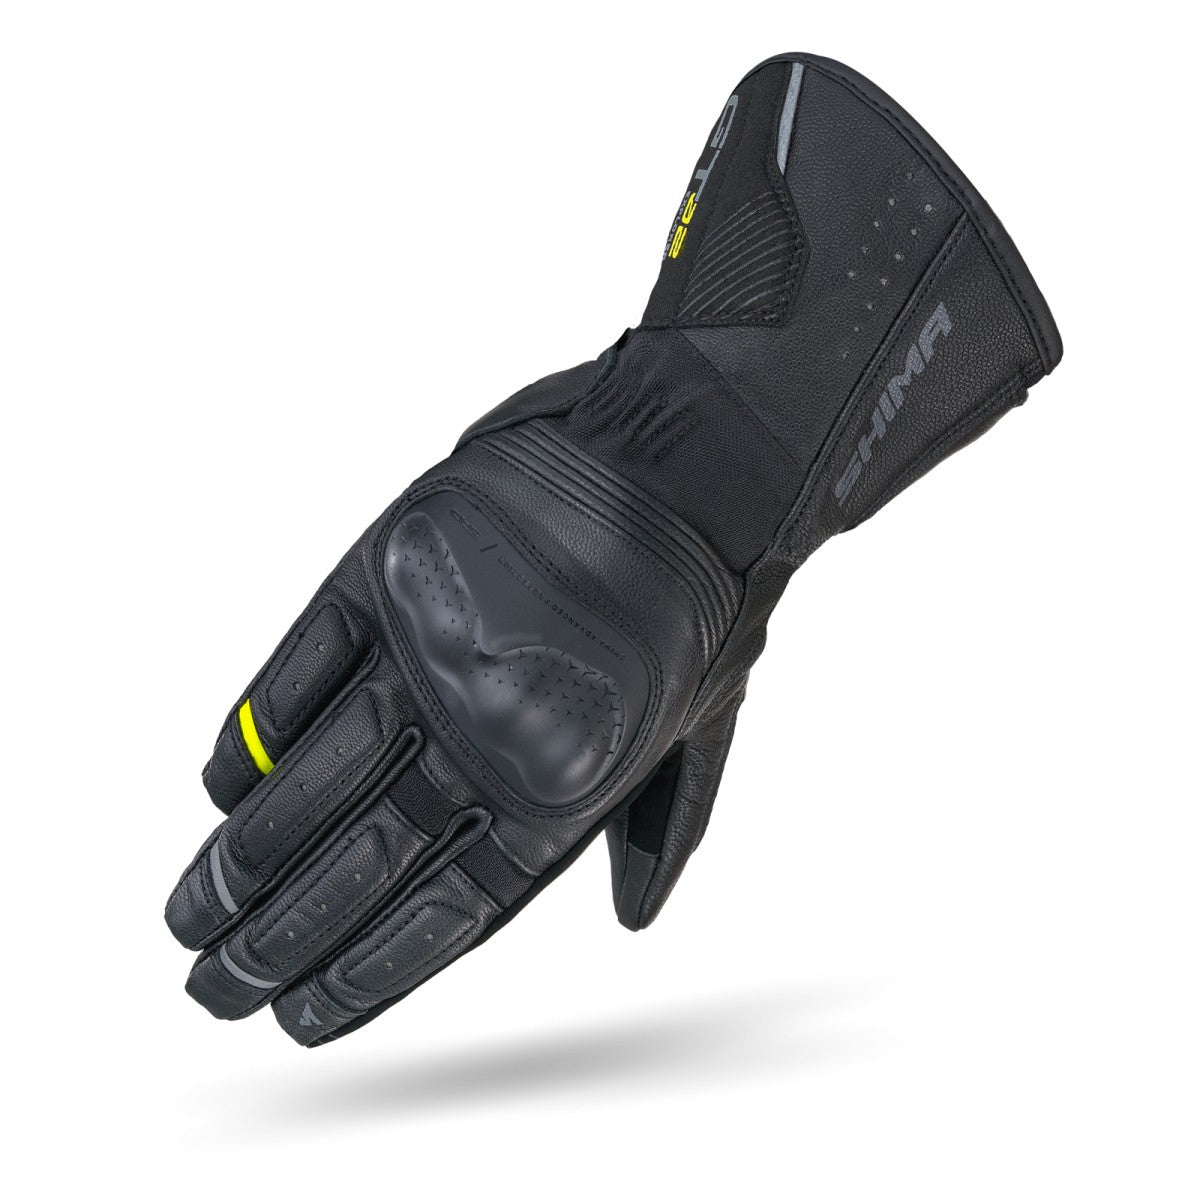 Black women&#39;s motorcycle glove from Shima